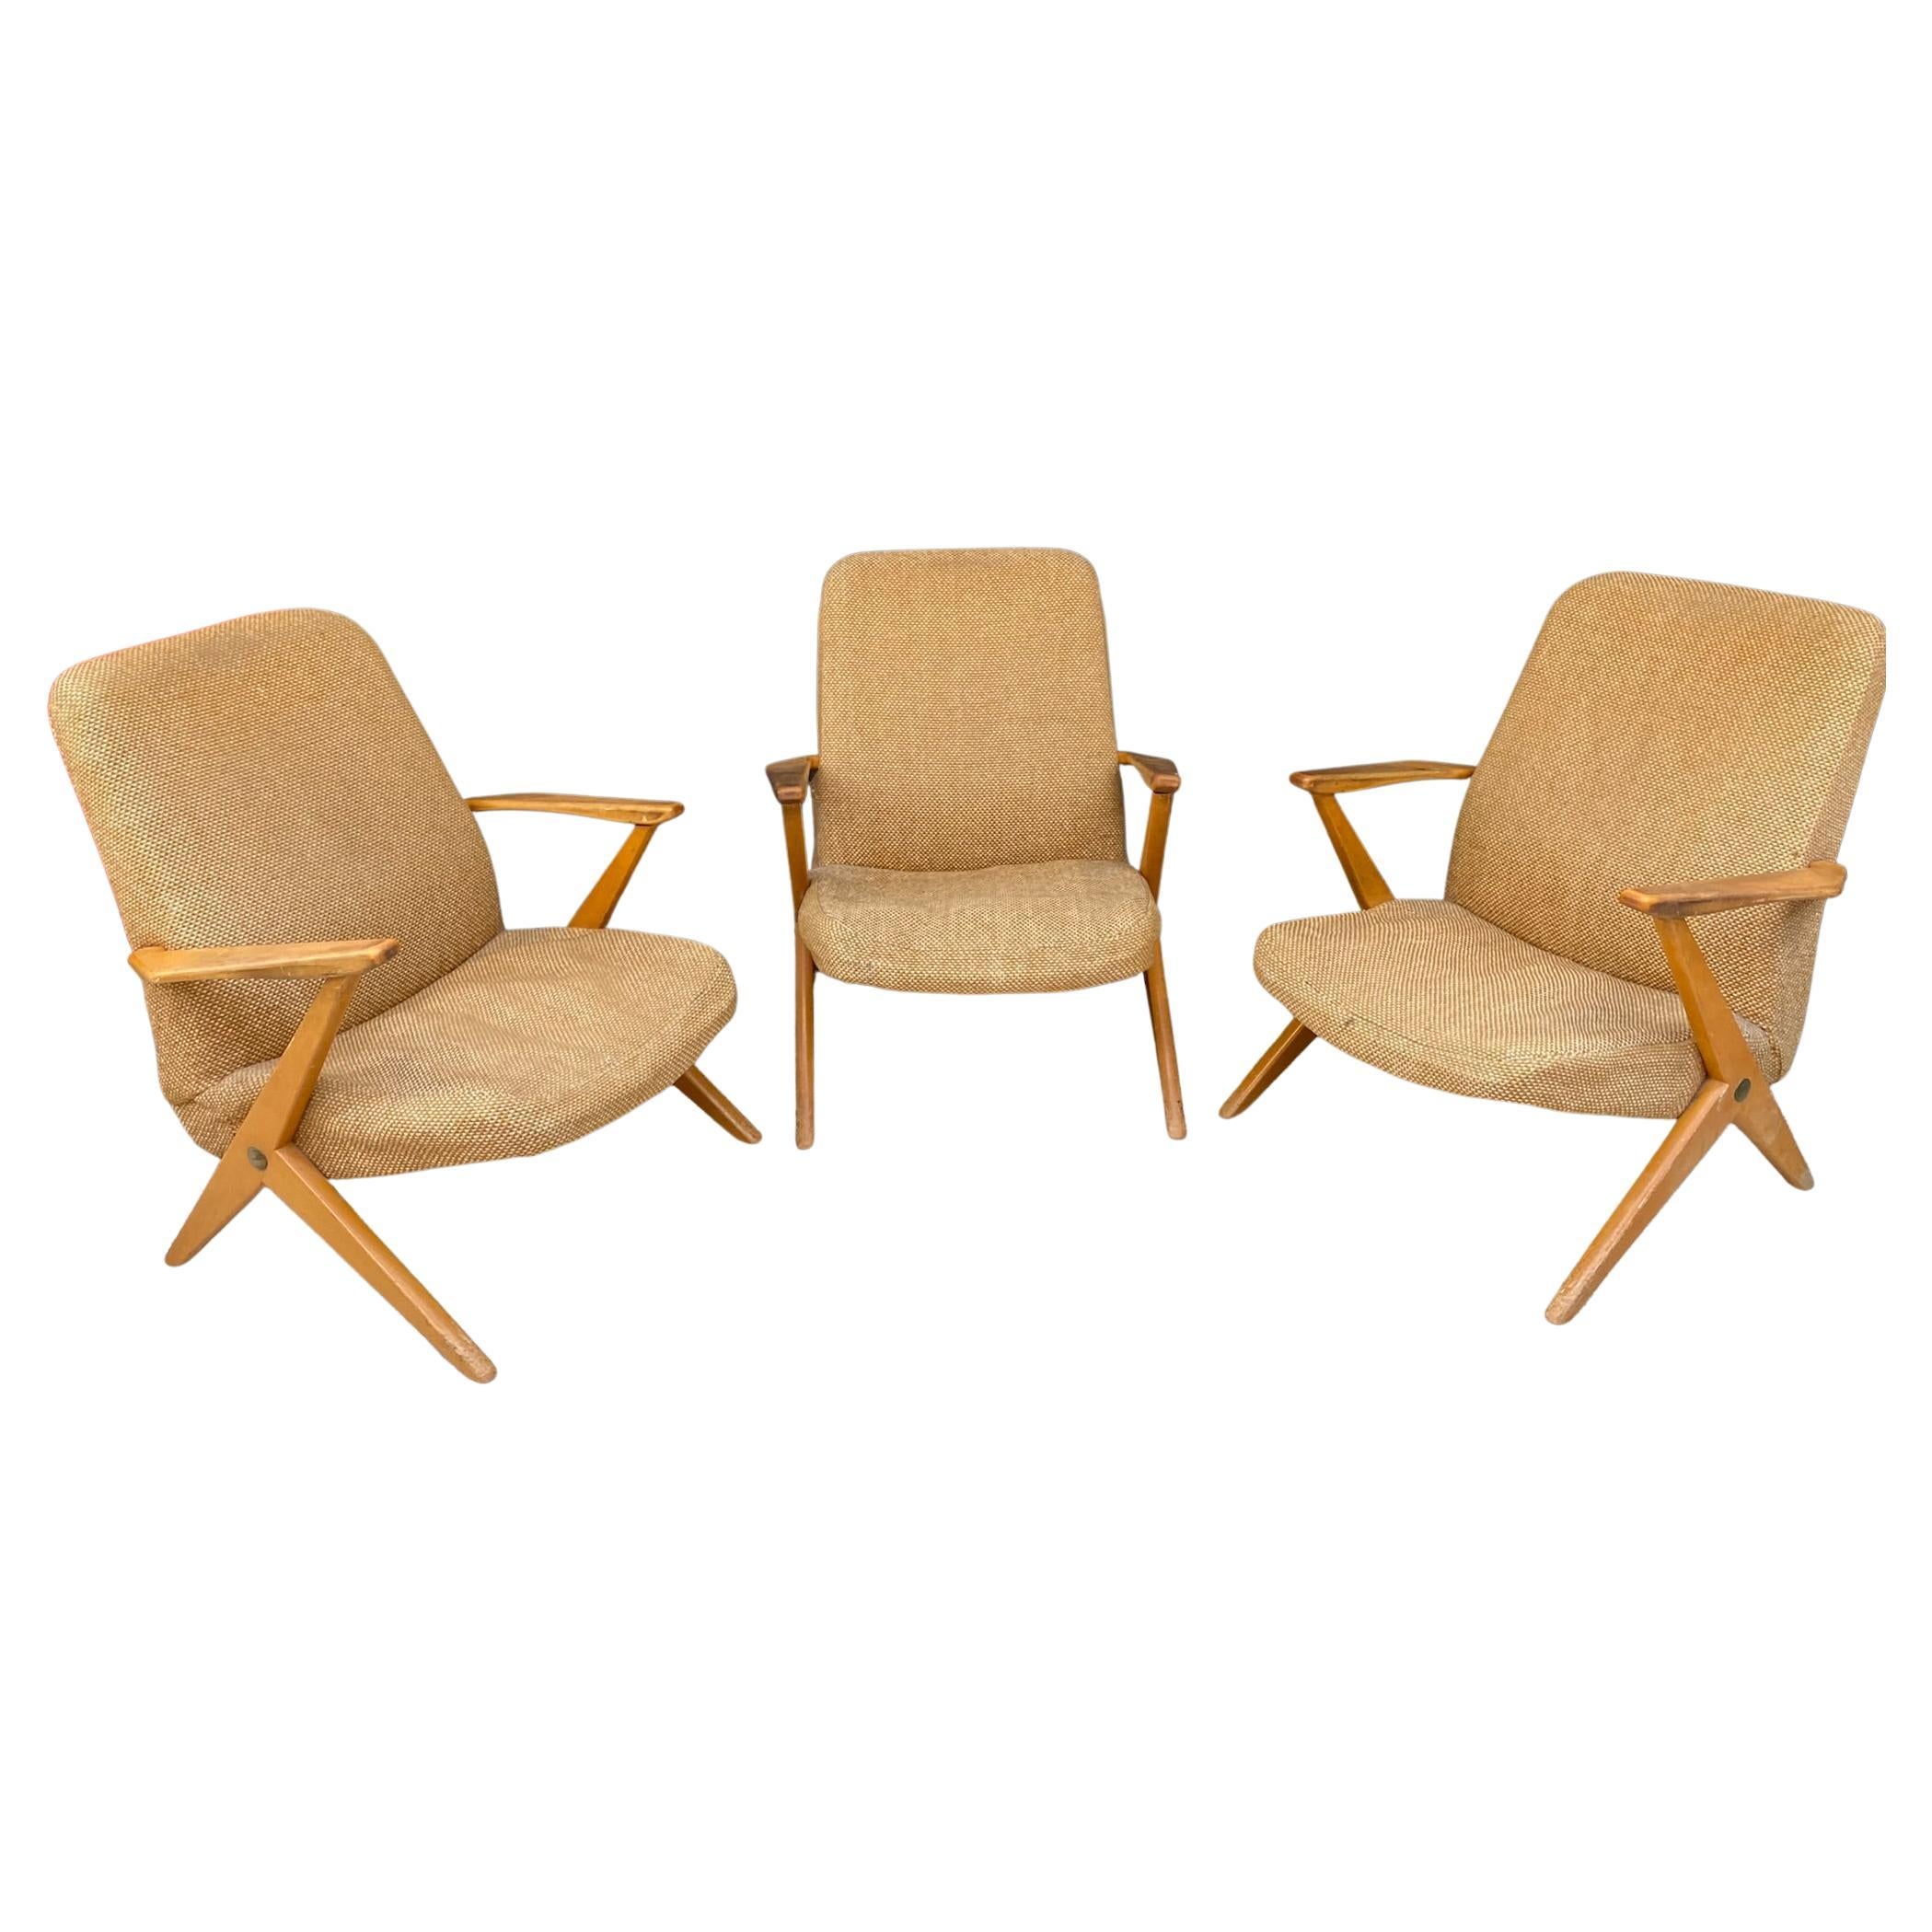 3 system armchairs, attributed to Cees Braakman, Edition Pastoe circa 1950/1960